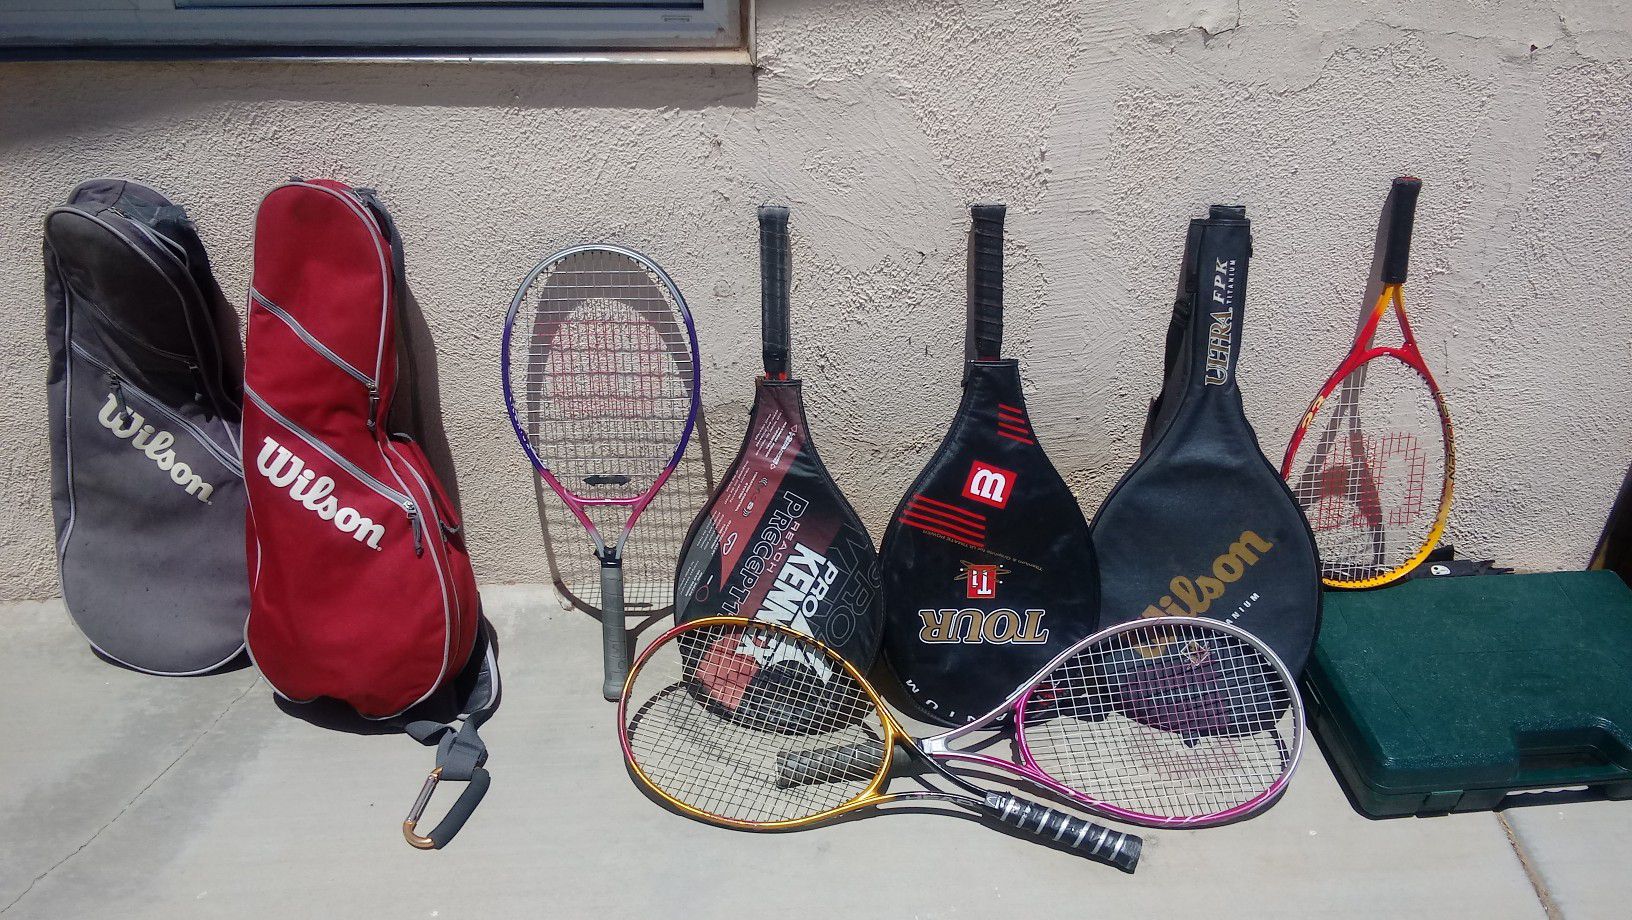 Wilson rackets and cases